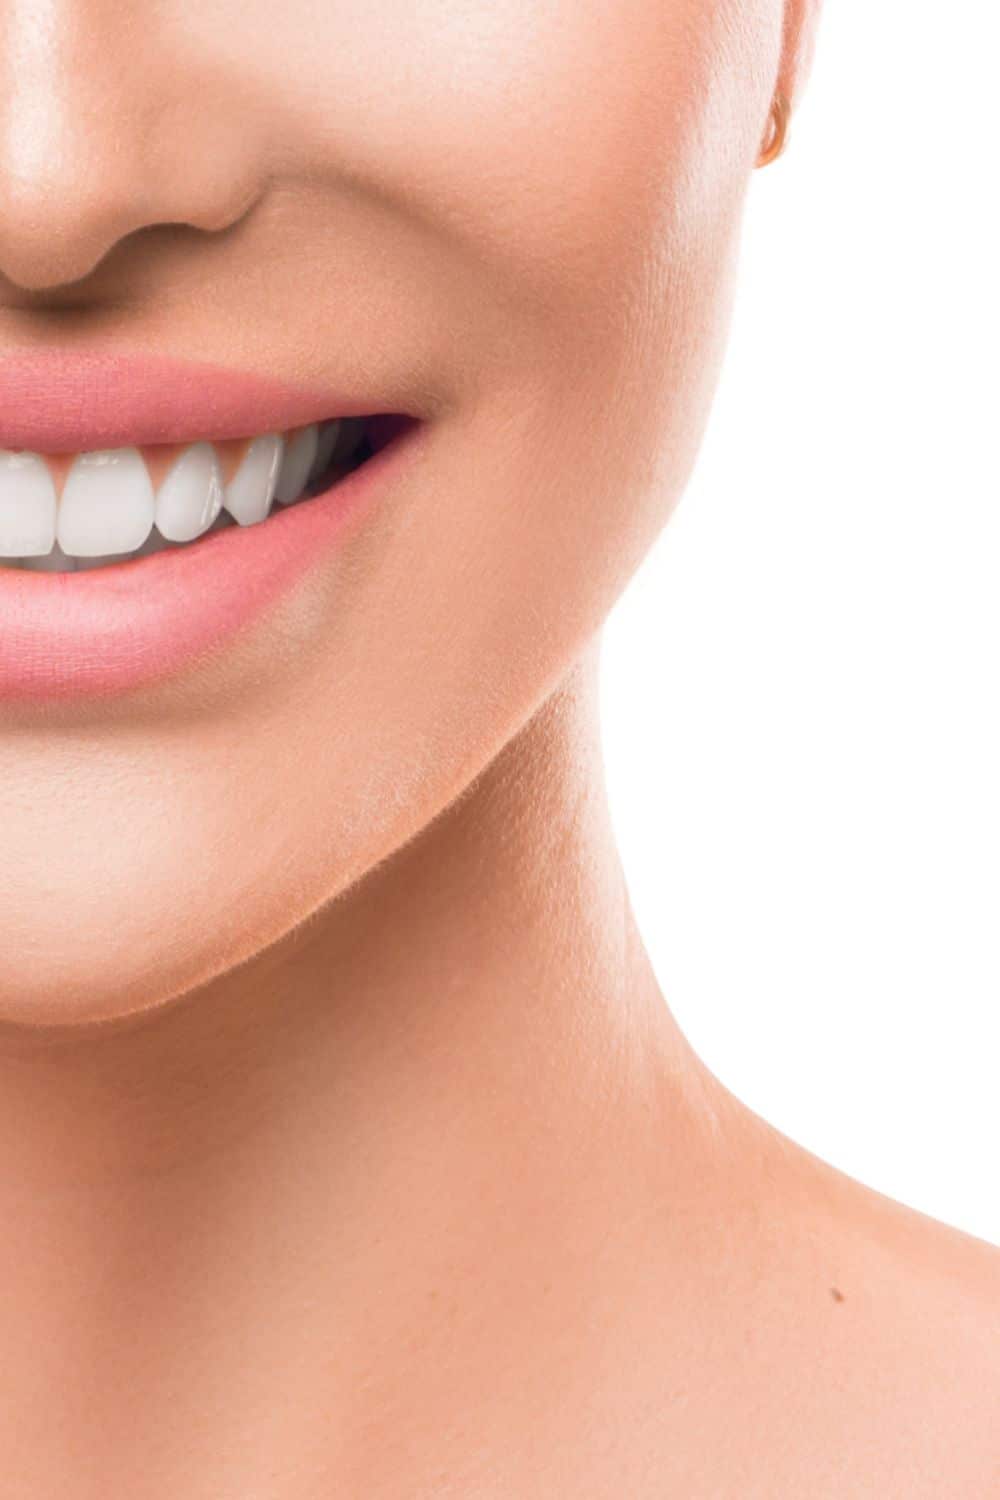 Tips for Keeping your Teeth Looking their Best